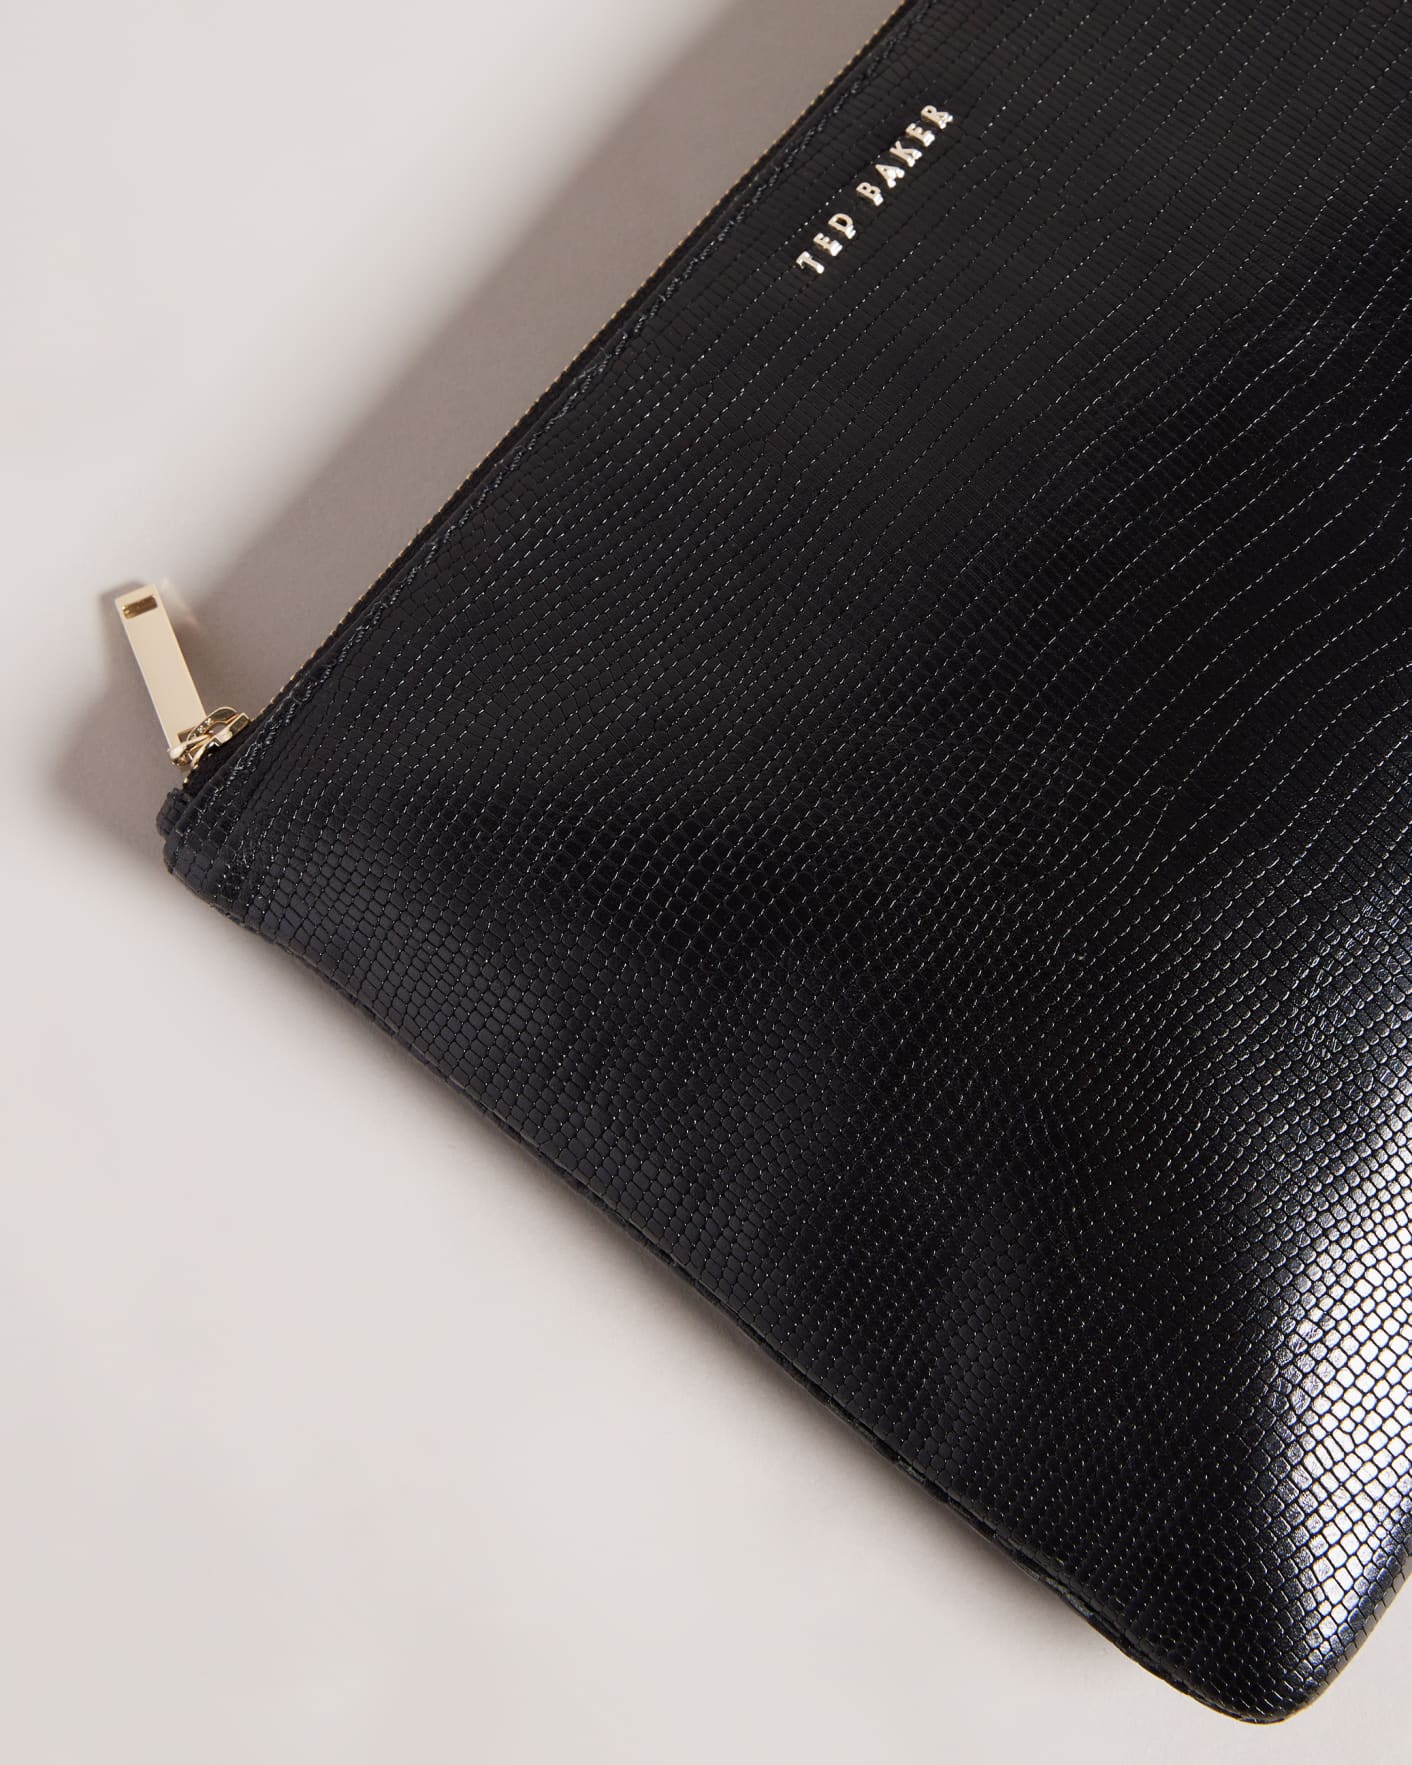 Black Lizard Detail Large Pouch Ted Baker